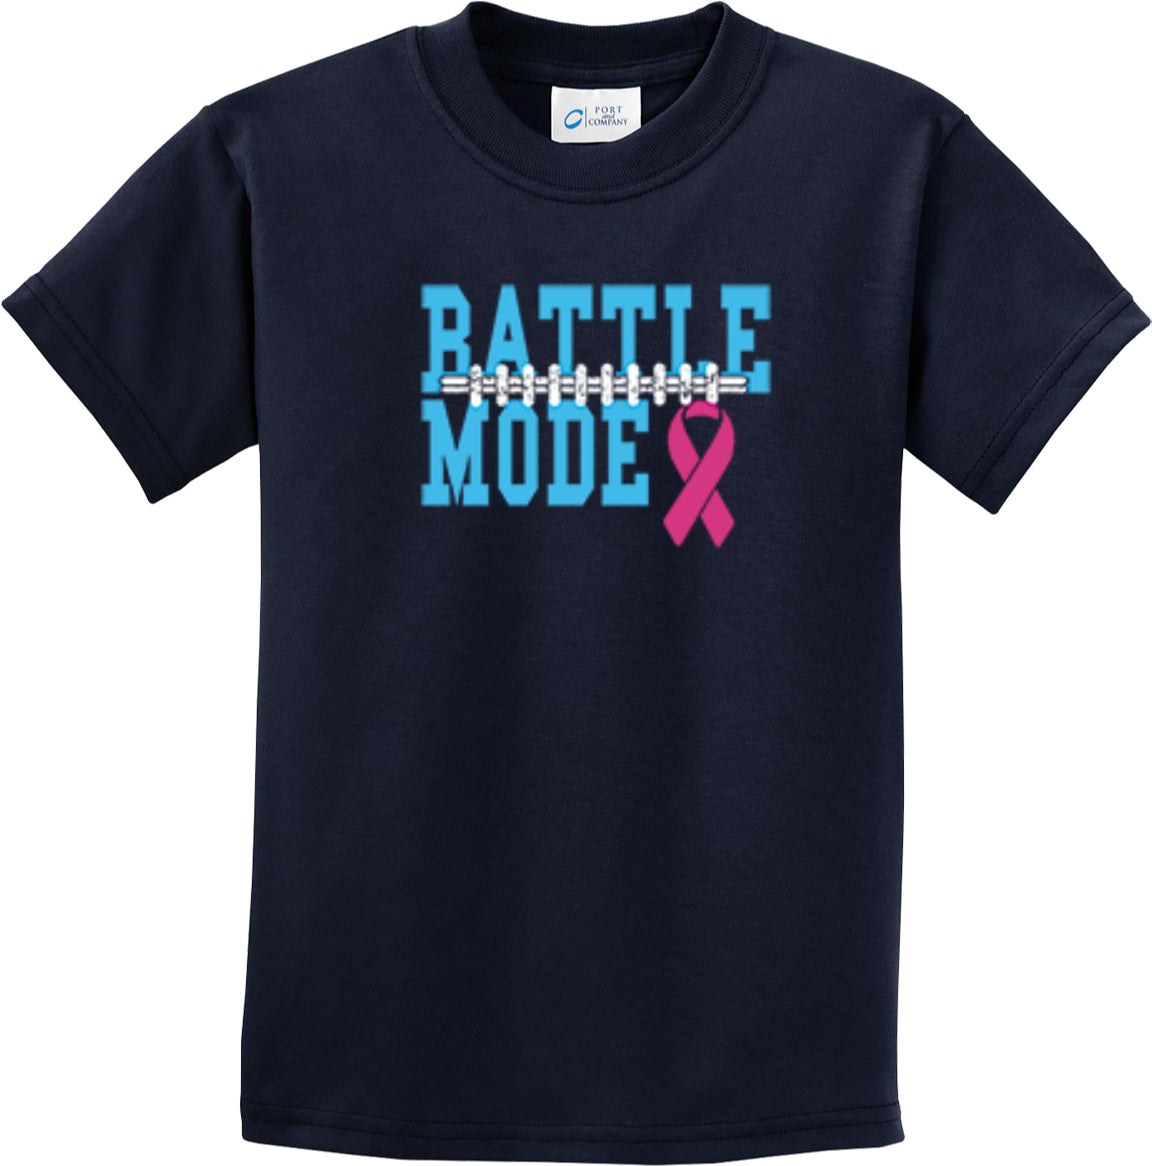 Kids Breast Cancer T-shirt Battle Mode Youth Tee